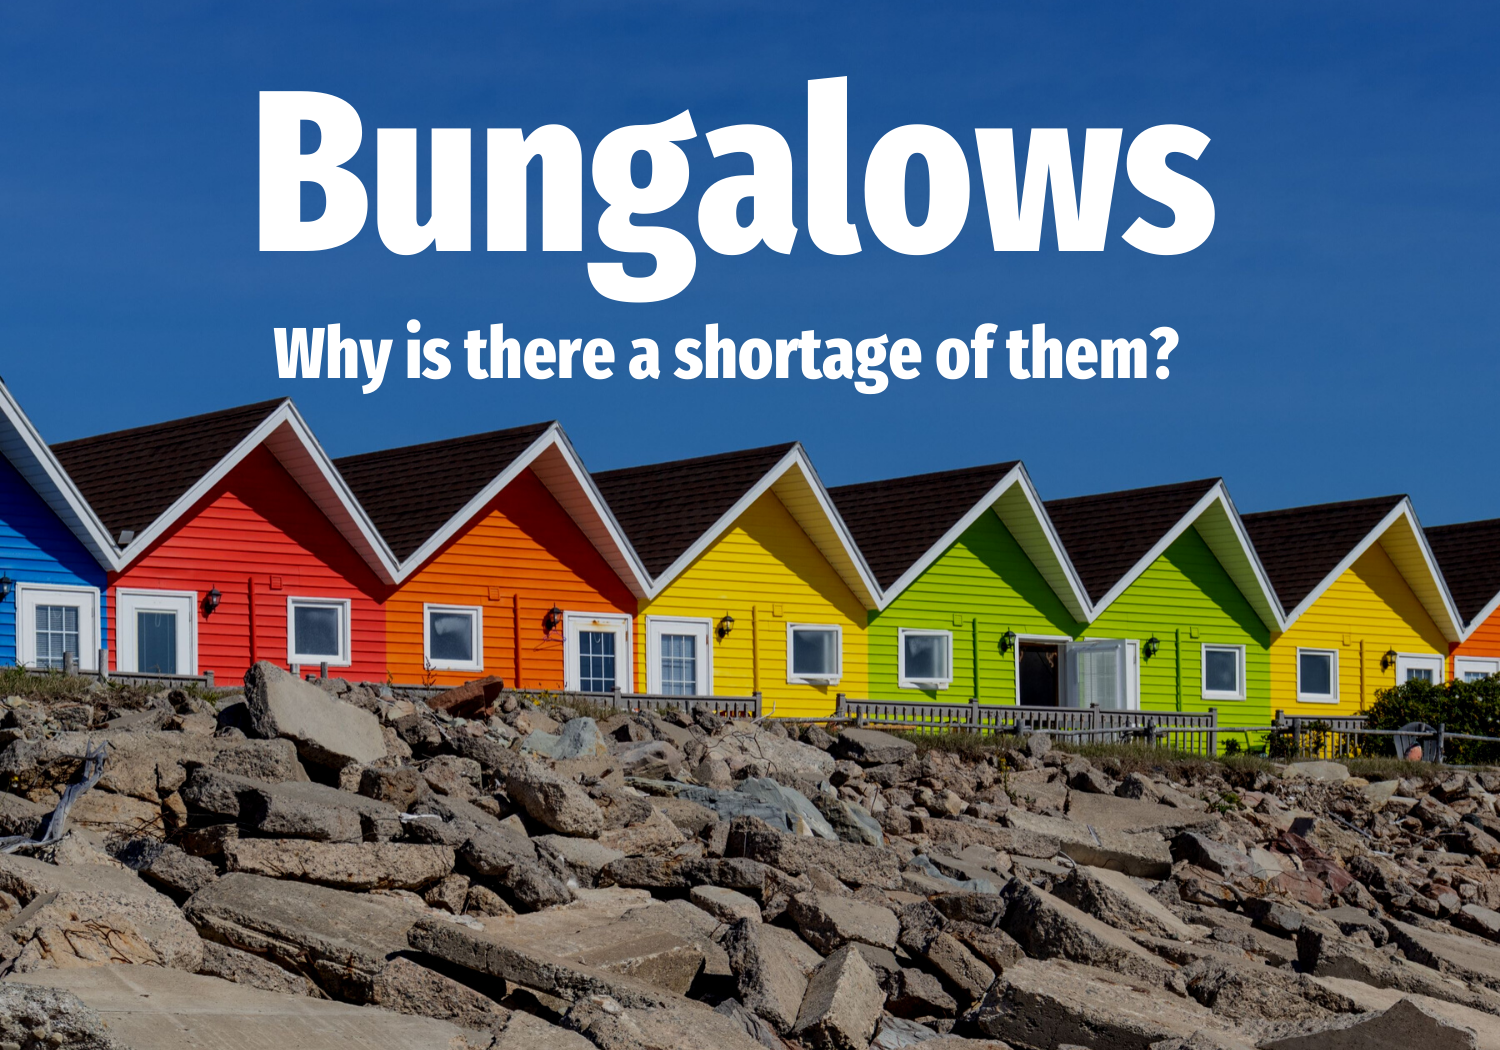 Only 1 In 216 Harrow Properties Are Bungalows, Despite An Ageing Population. Why?